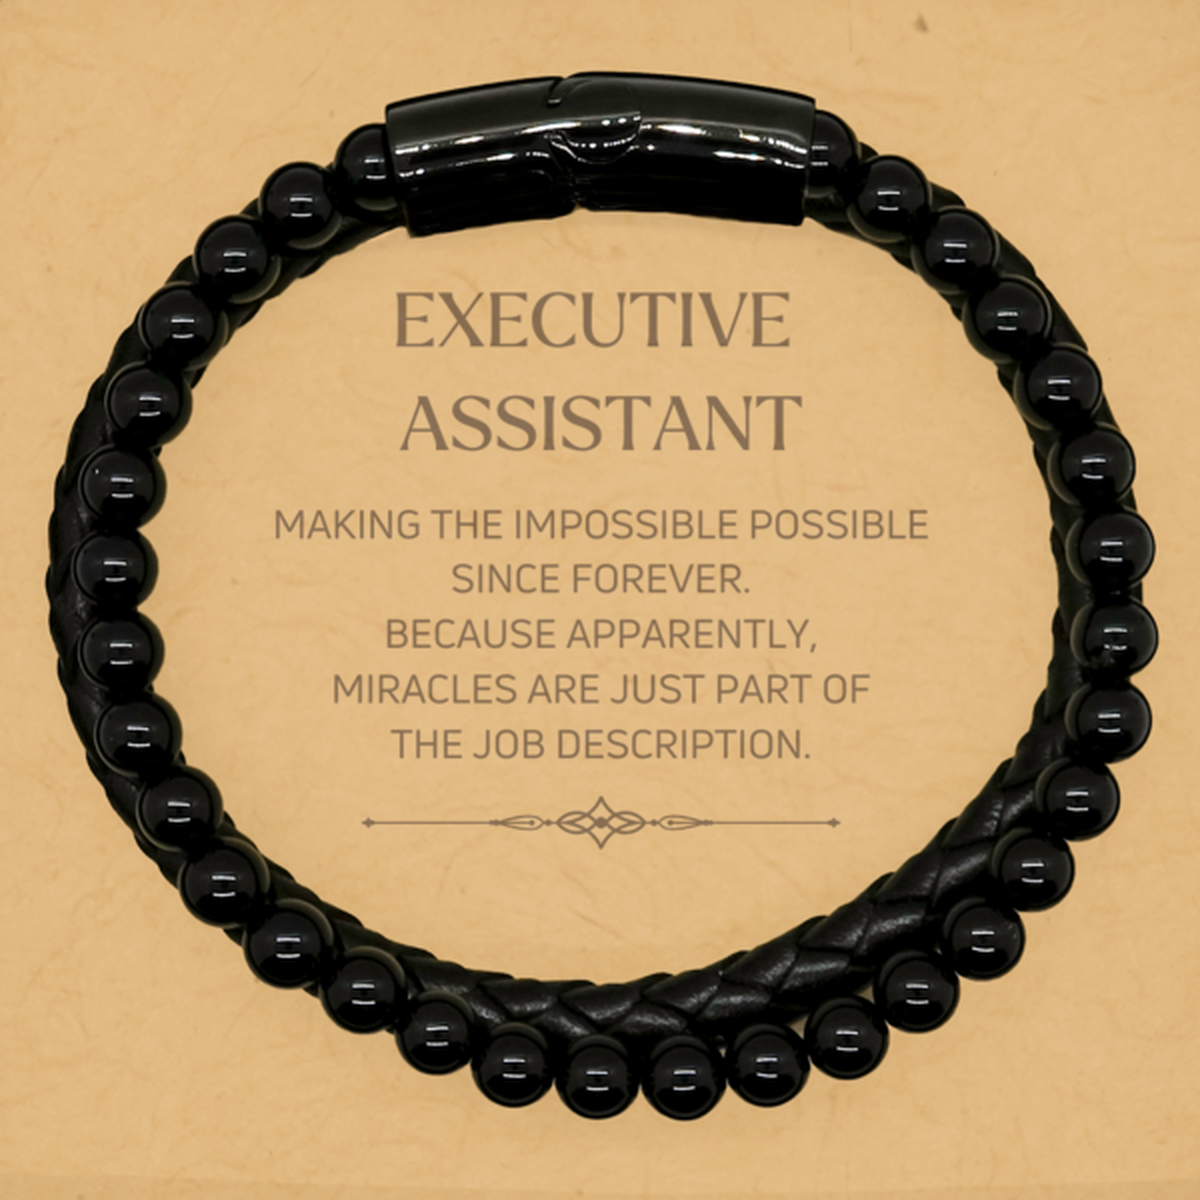 Funny Executive Assistant Gifts, Miracles are just part of the job description, Inspirational Birthday Stone Leather Bracelets For Executive Assistant, Men, Women, Coworkers, Friends, Boss